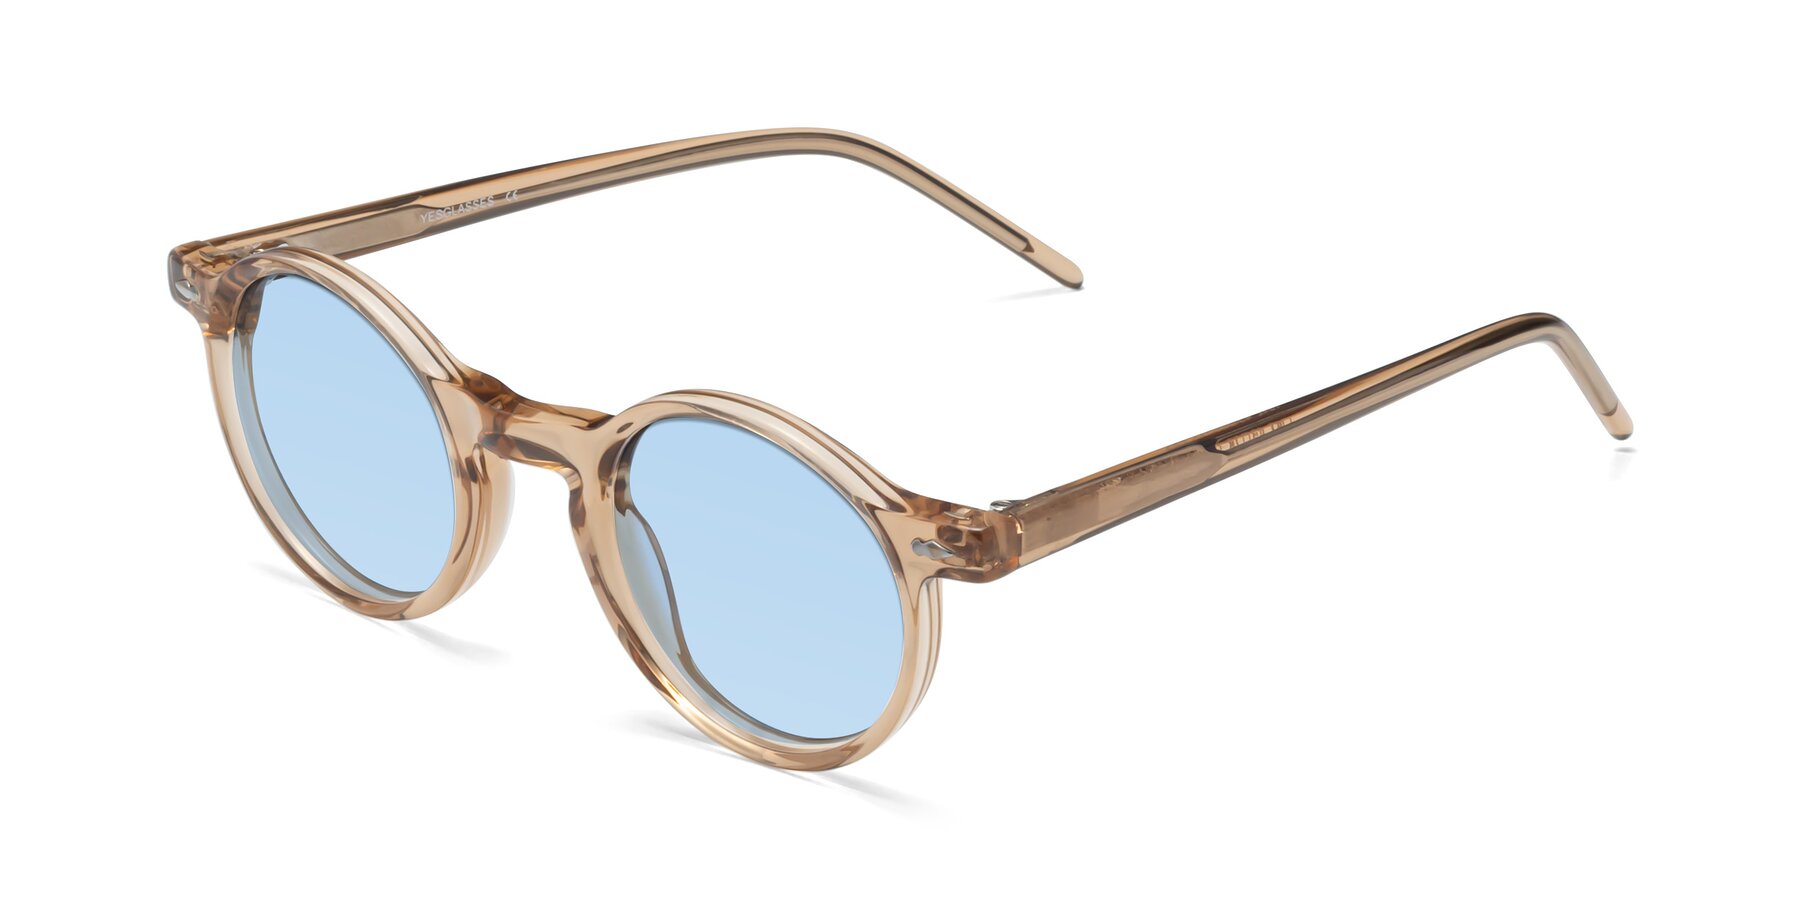 Angle of 1542 in Caramel with Light Blue Tinted Lenses